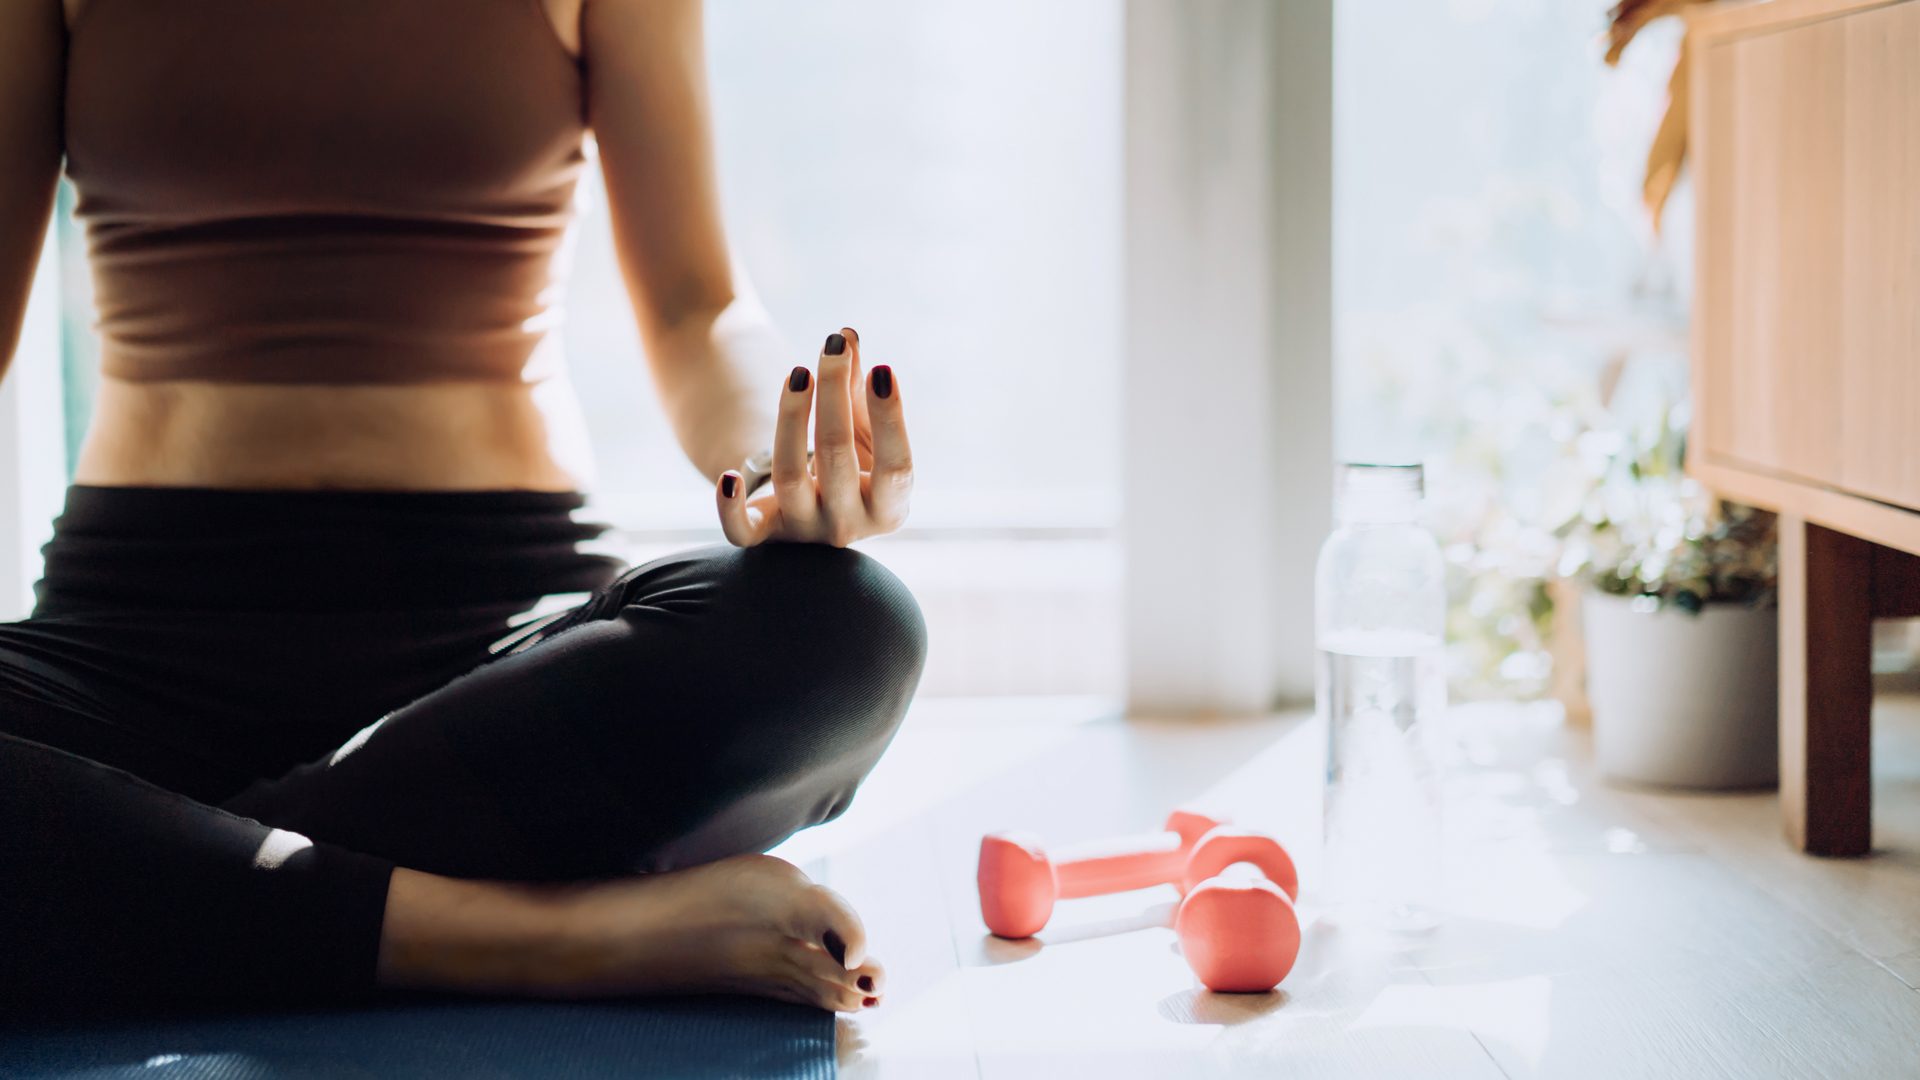 Does yoga help you lose weight?